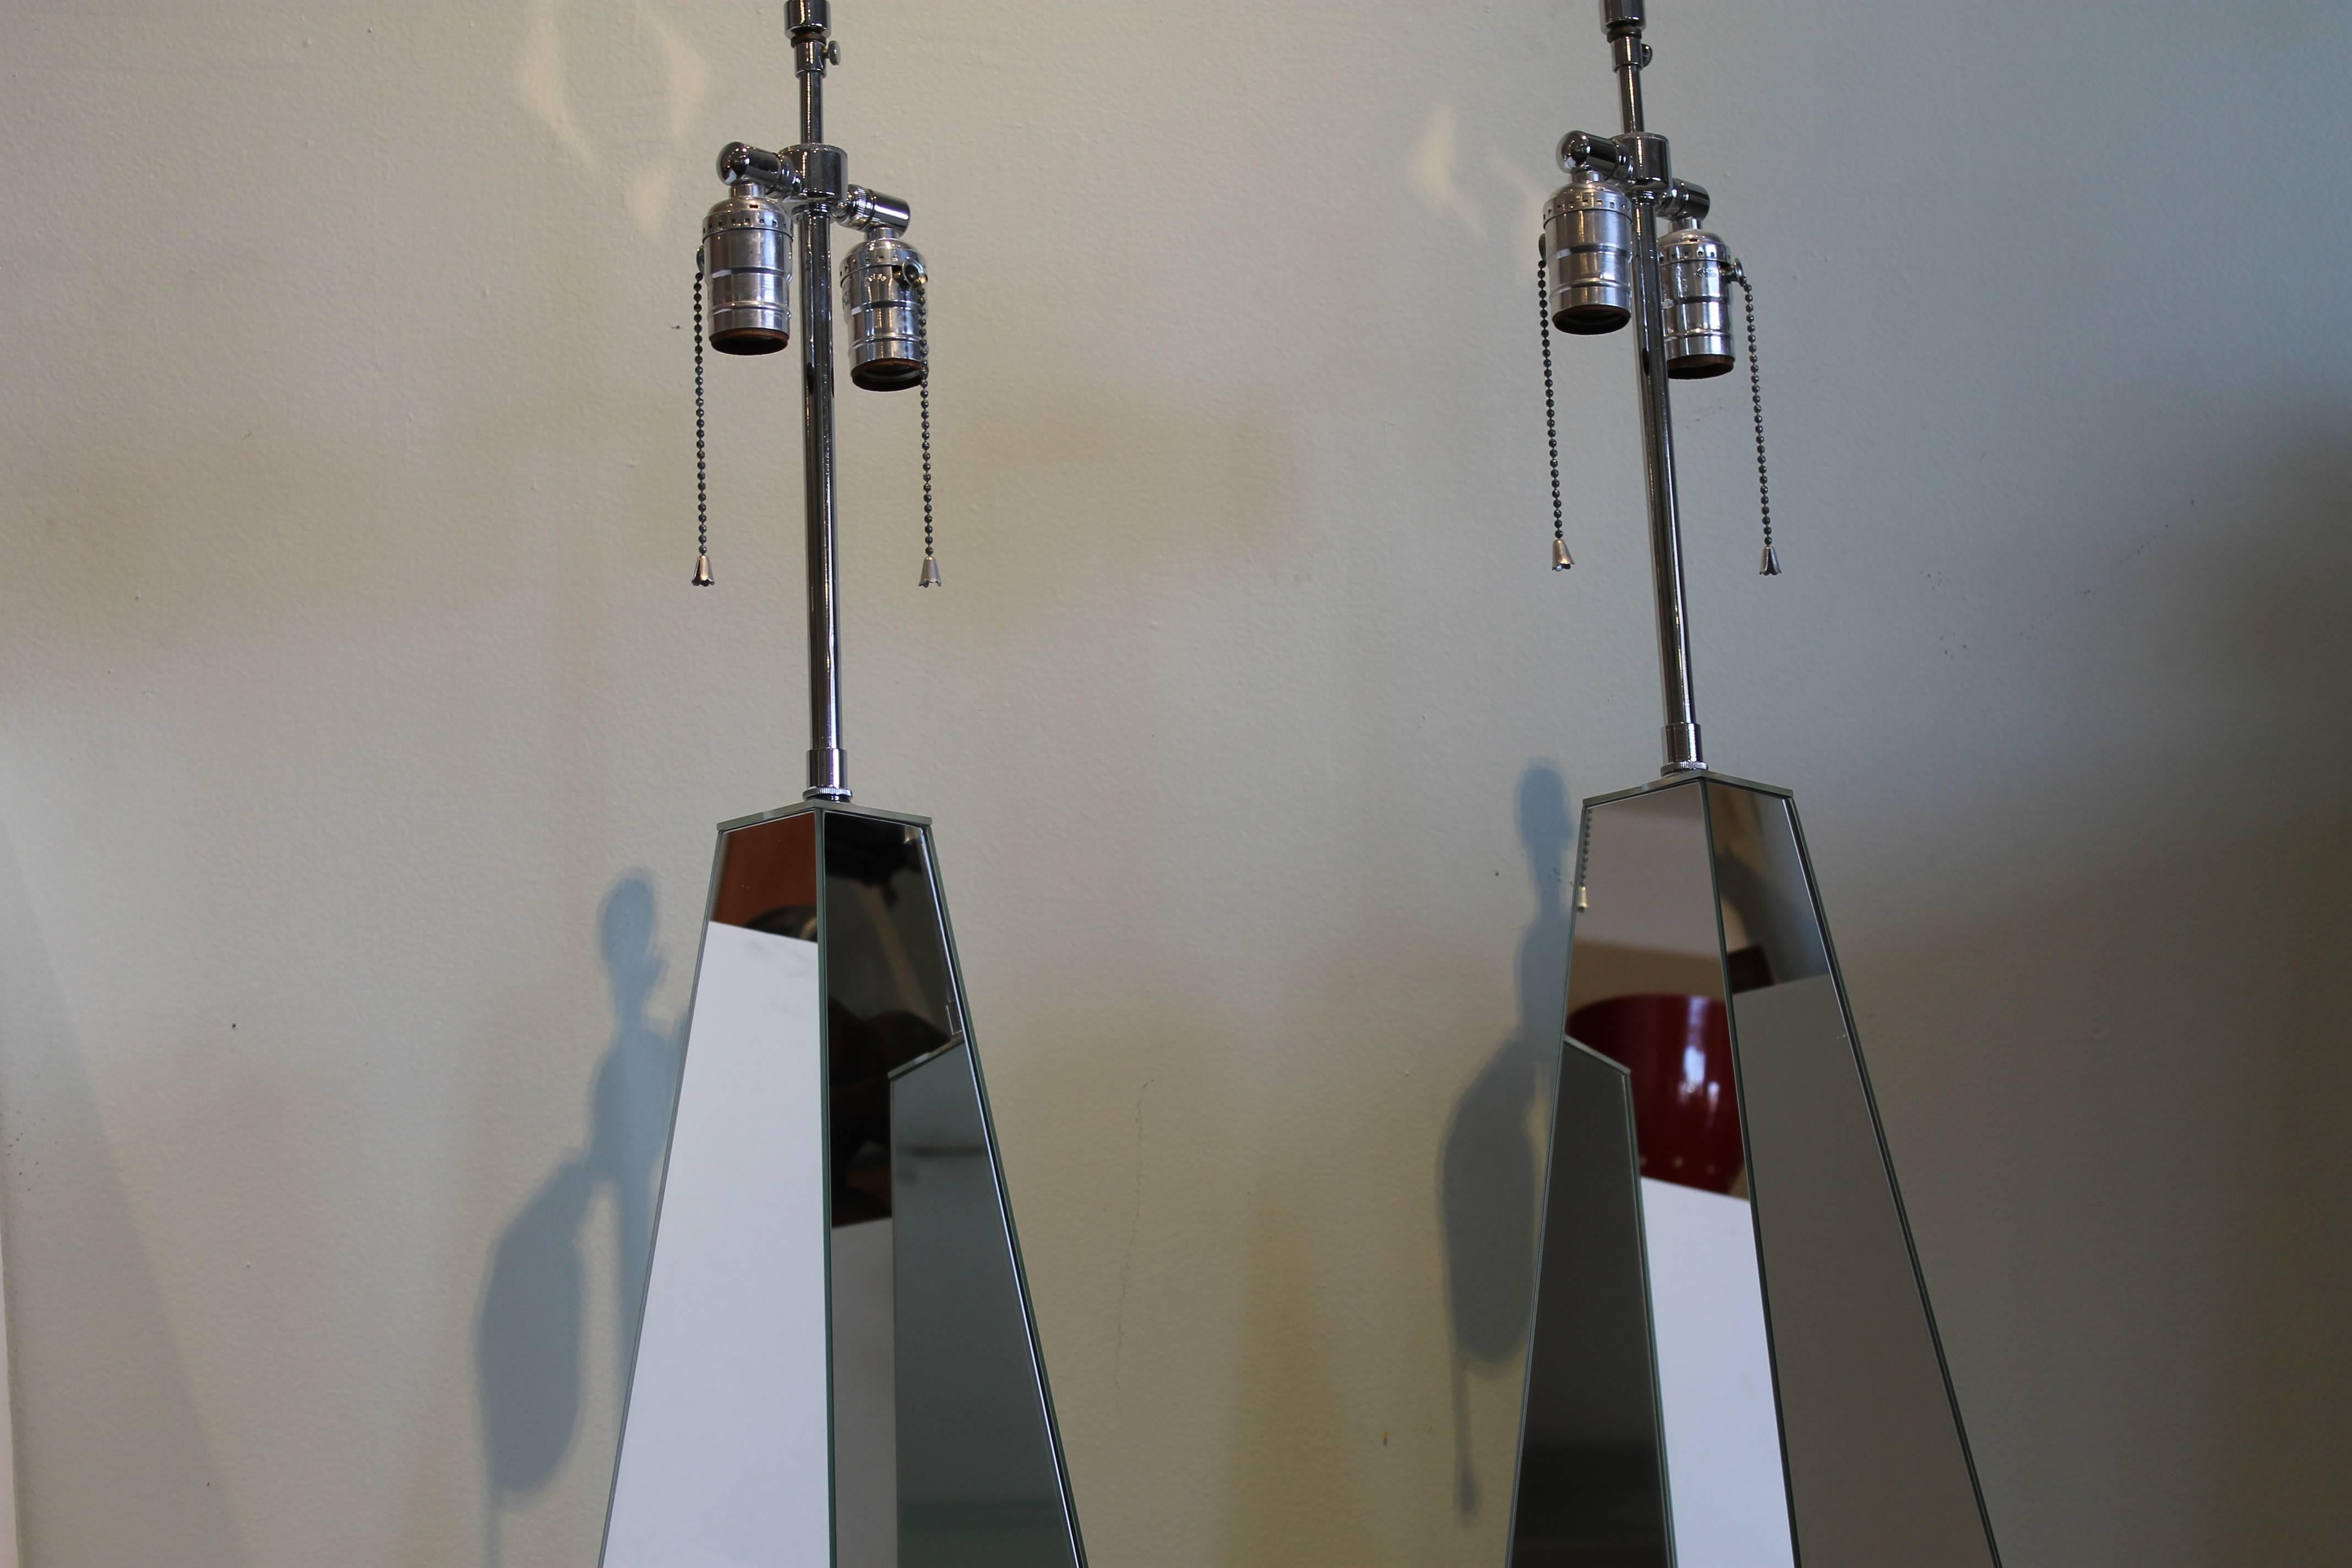 American Pair of Mirrored Obelisk Lamps with Lucite Bases